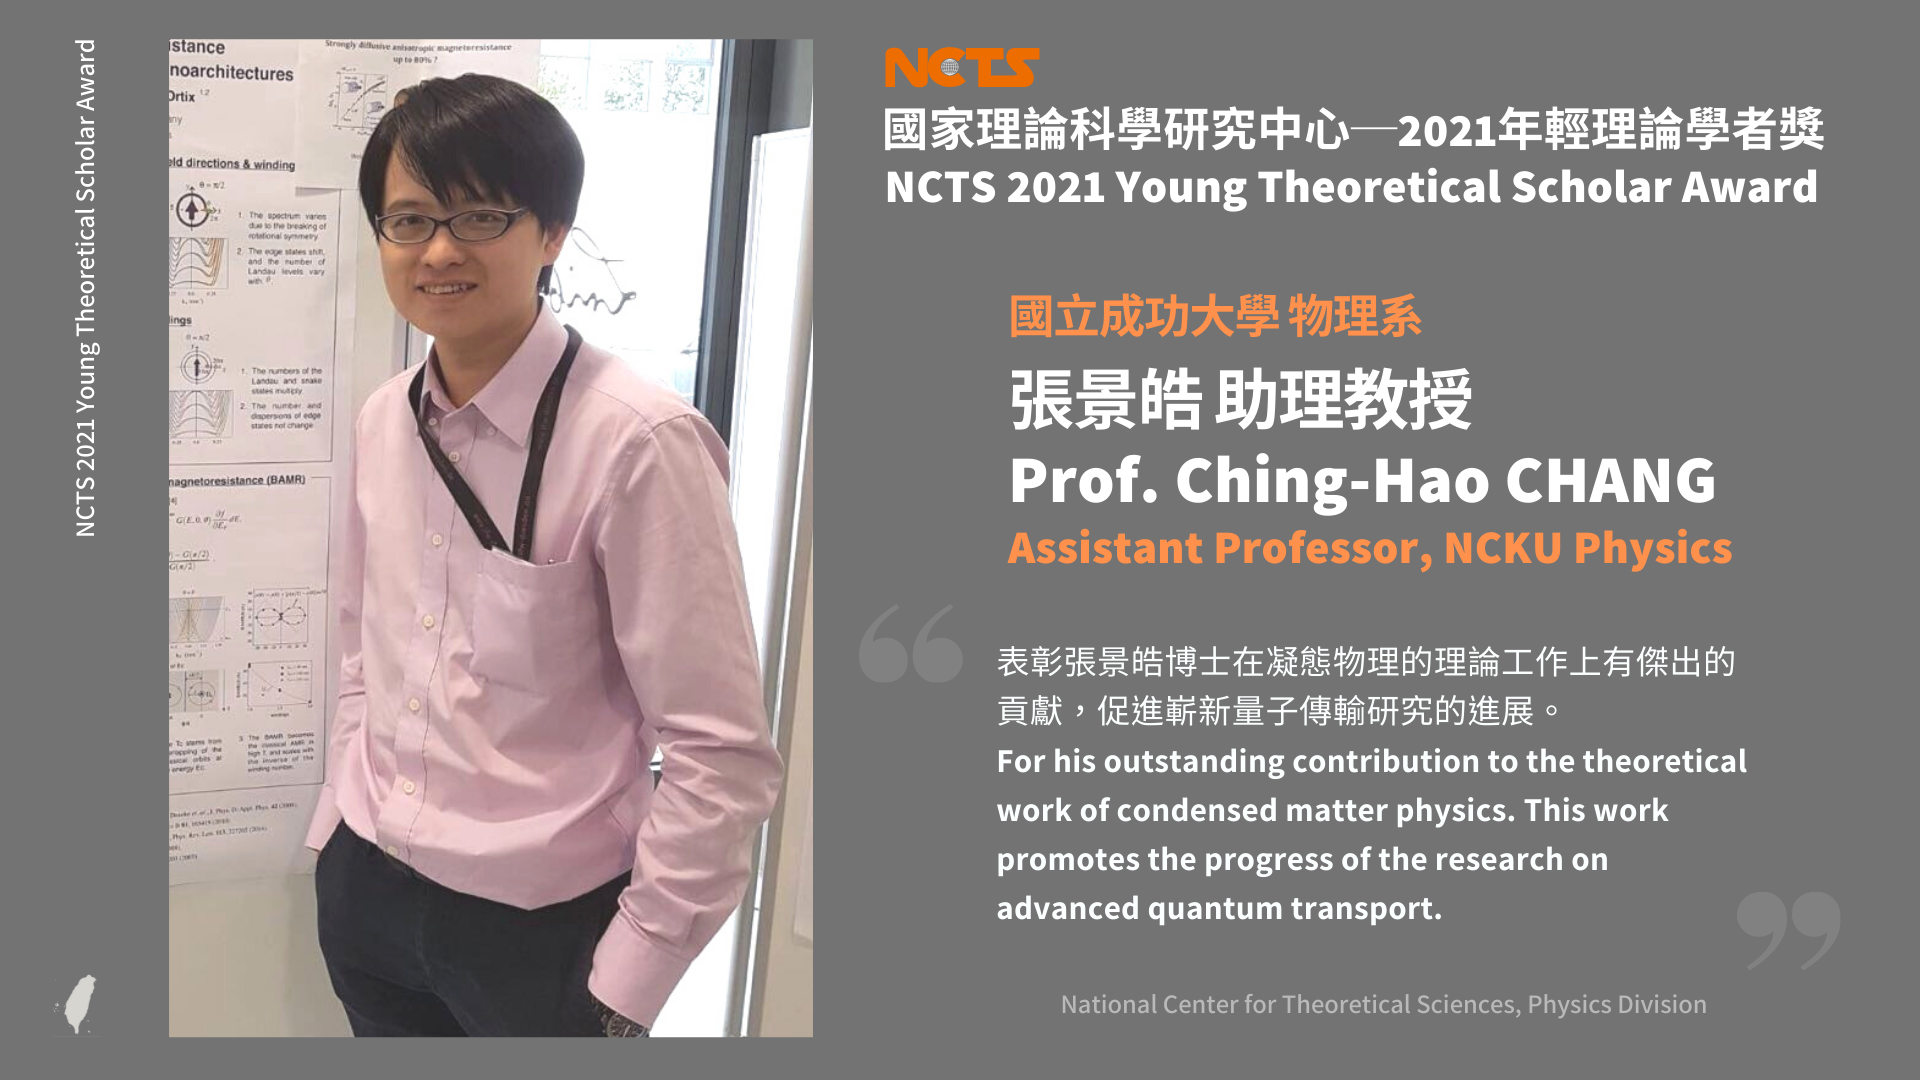 NCTS 2021 Physics Young Theoretical Scholar Award: Prof. Ching-Hao Chang